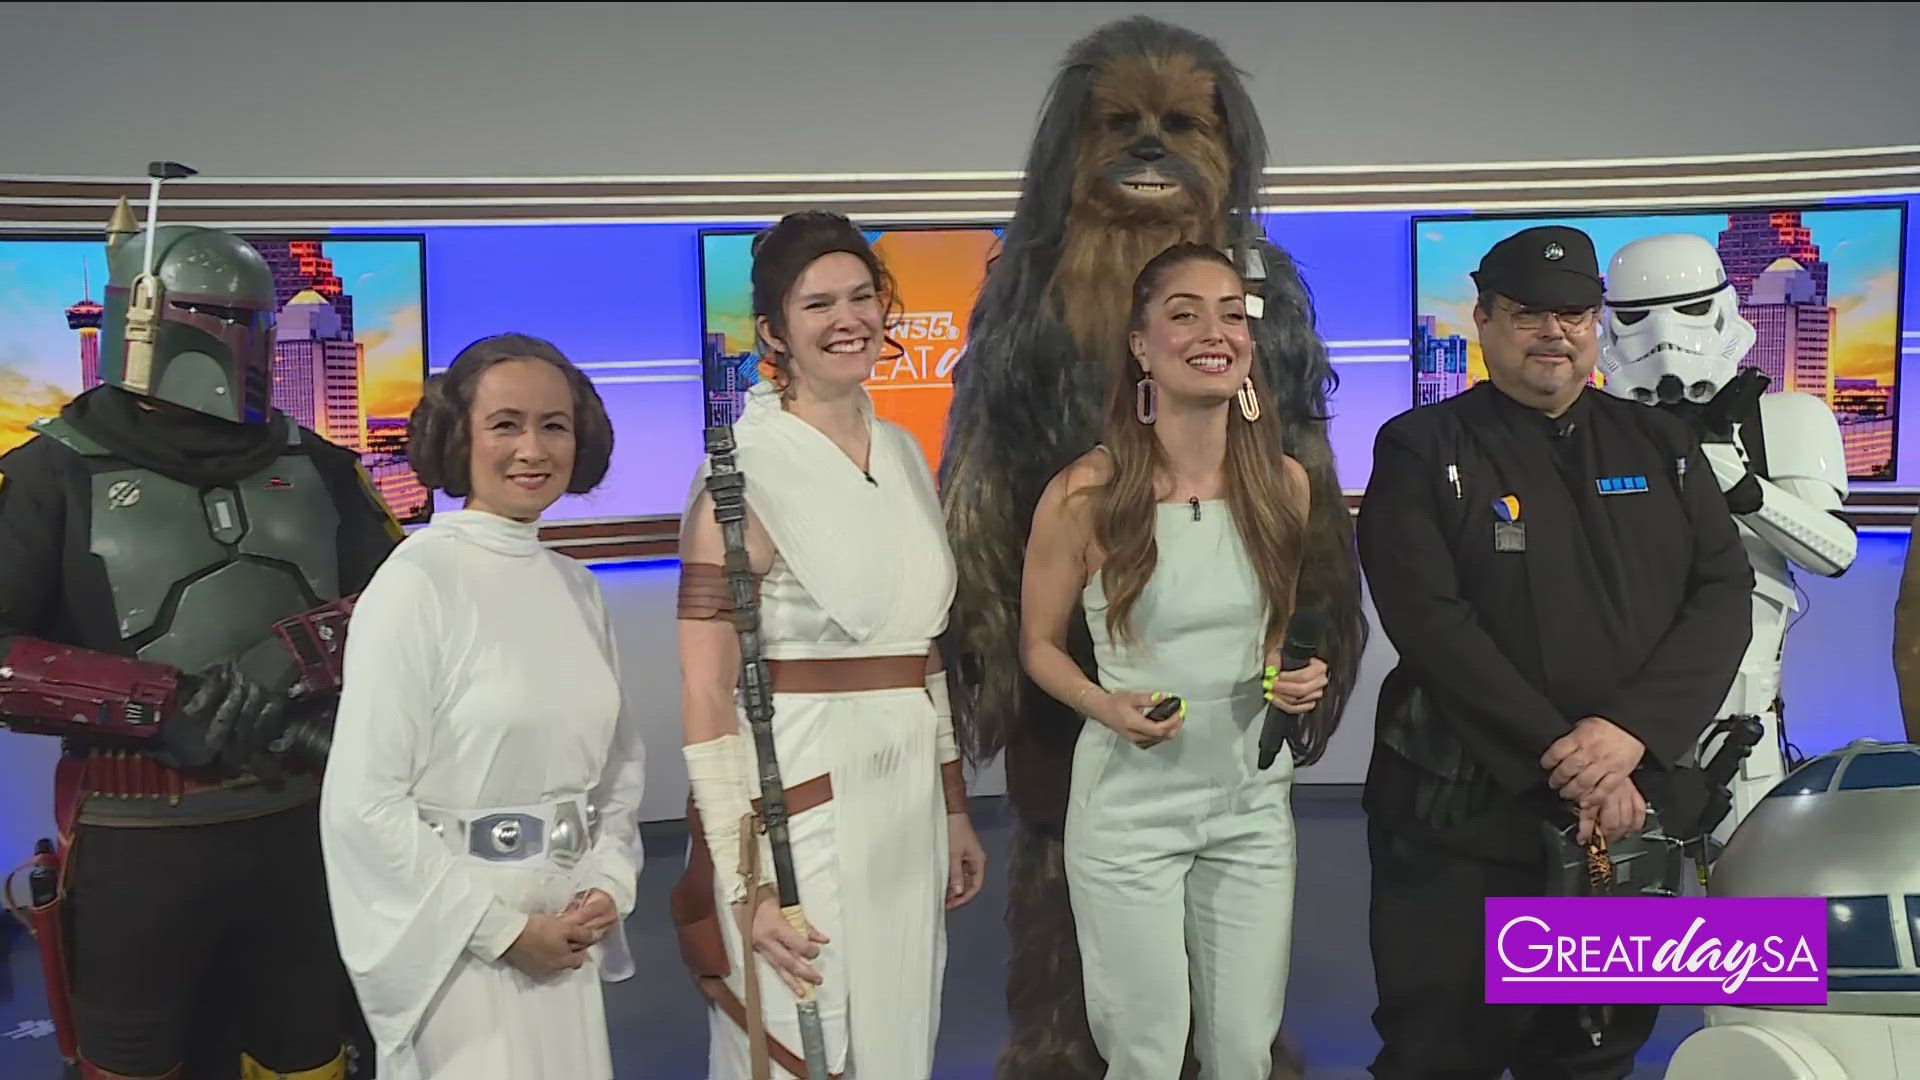 Star Wars Society of San Antonio visits from a galaxy far away for Star Wars Day.